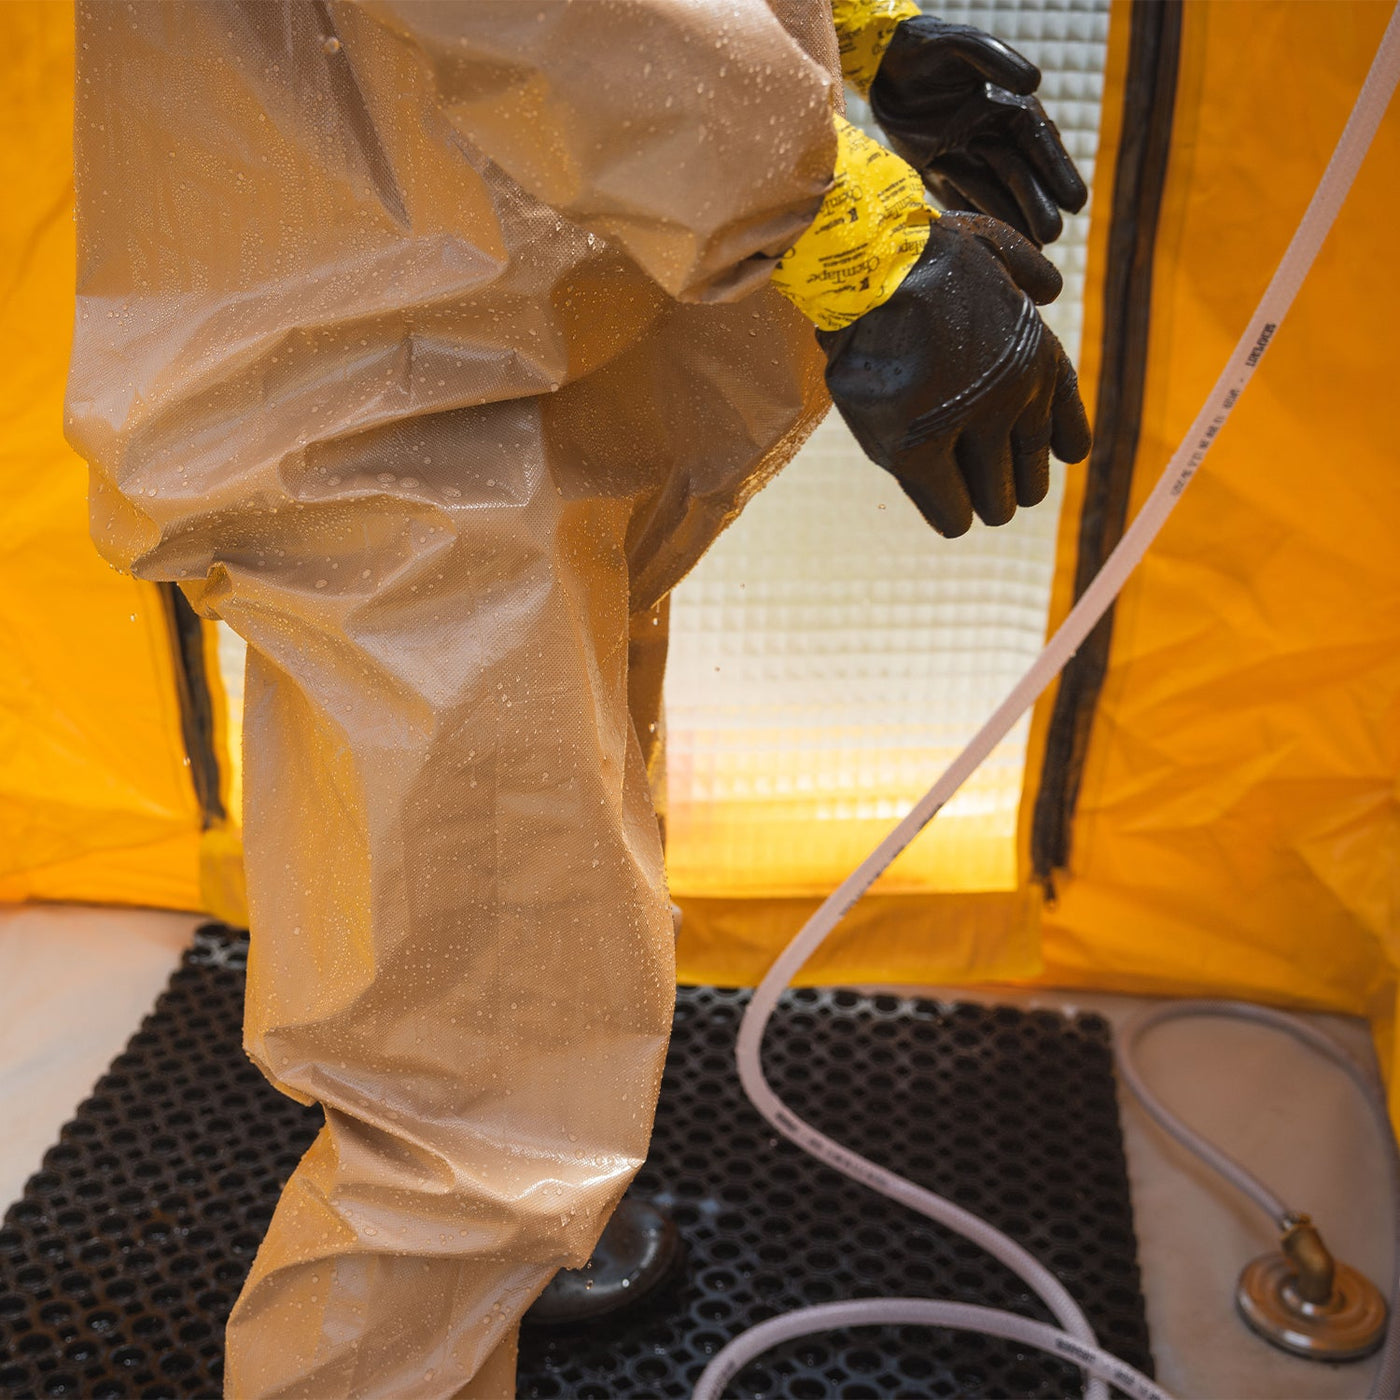 View of a man wearing a hazmat suit standing inside of the decontamination shower. The shower's floor can be seen, along with the drainage mat and a water disposal outlet.